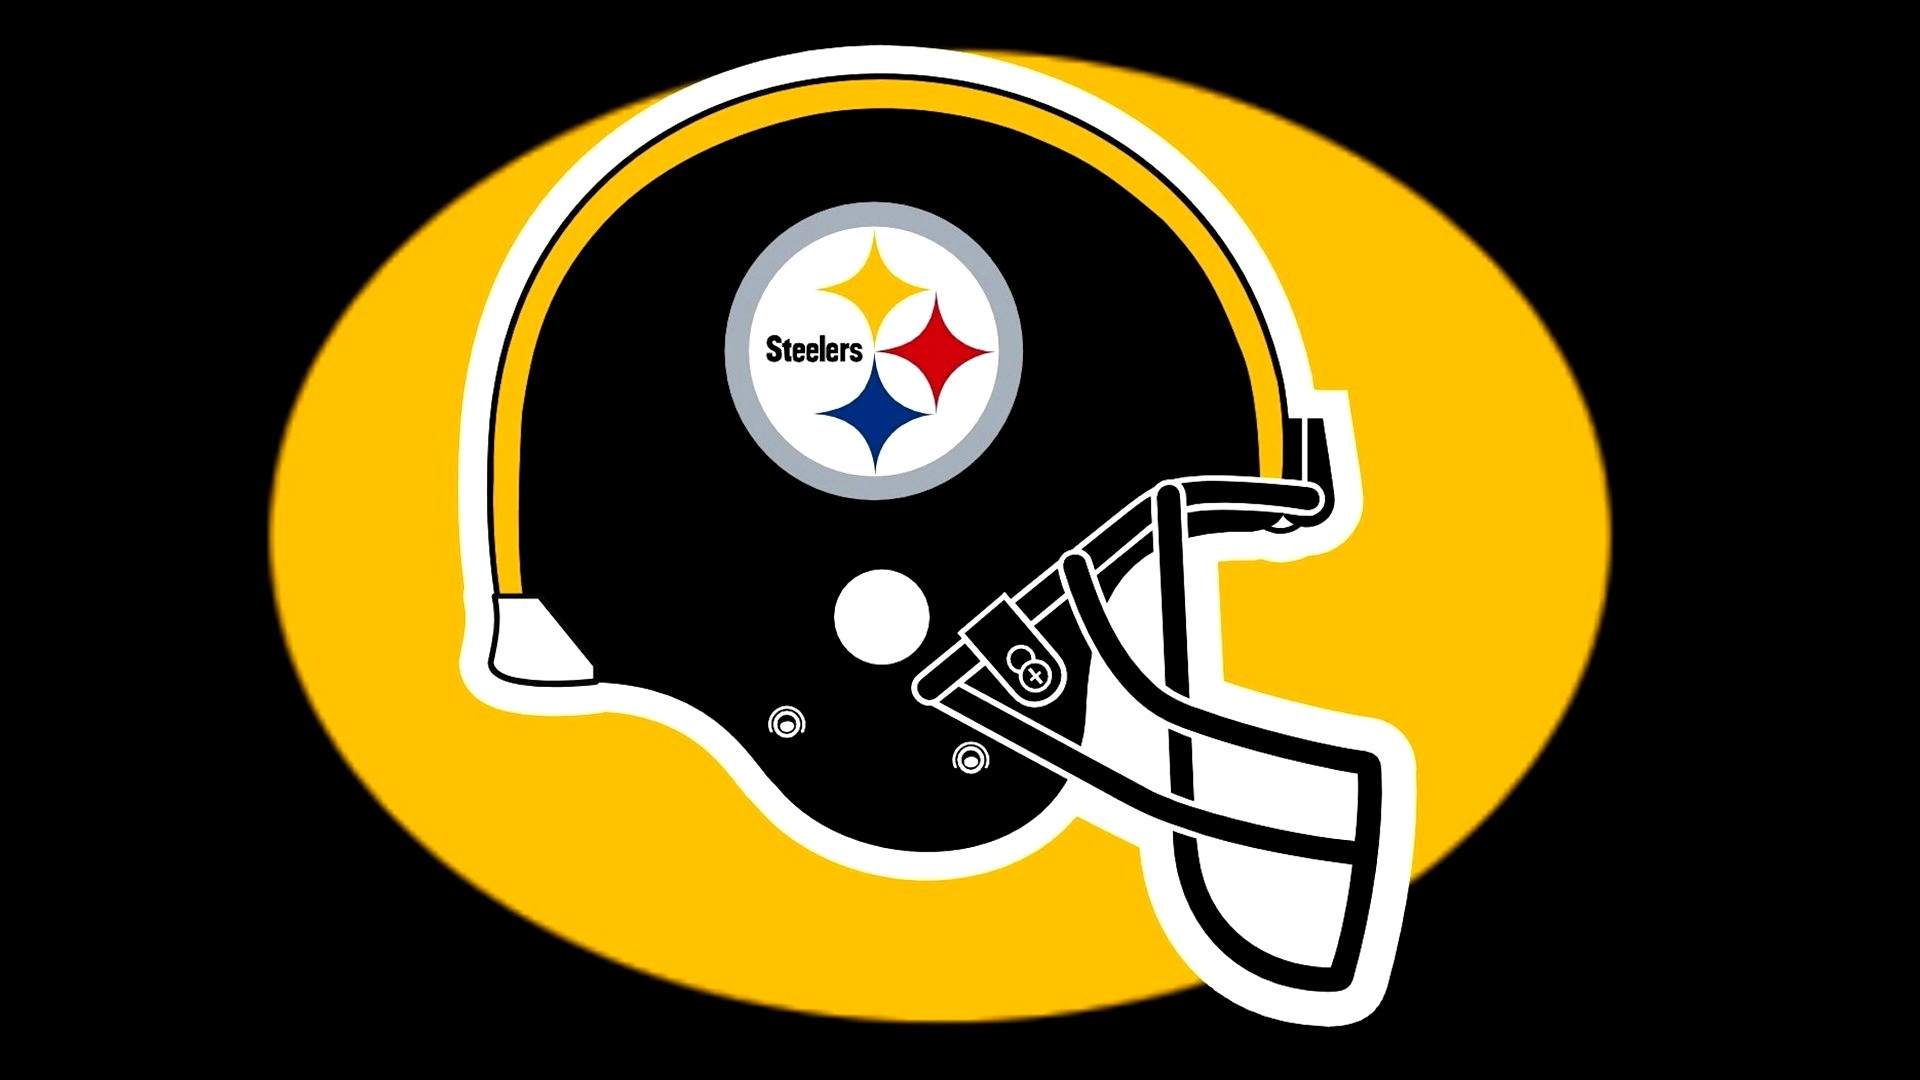 Pittsburgh Steelers Wallpaper For Desktop with high-resolution 1920x1080 pixel. You can use and set as wallpaper for Notebook Screensavers, Mac Wallpapers, Mobile Home Screen, iPhone or Android Phones Lock Screen